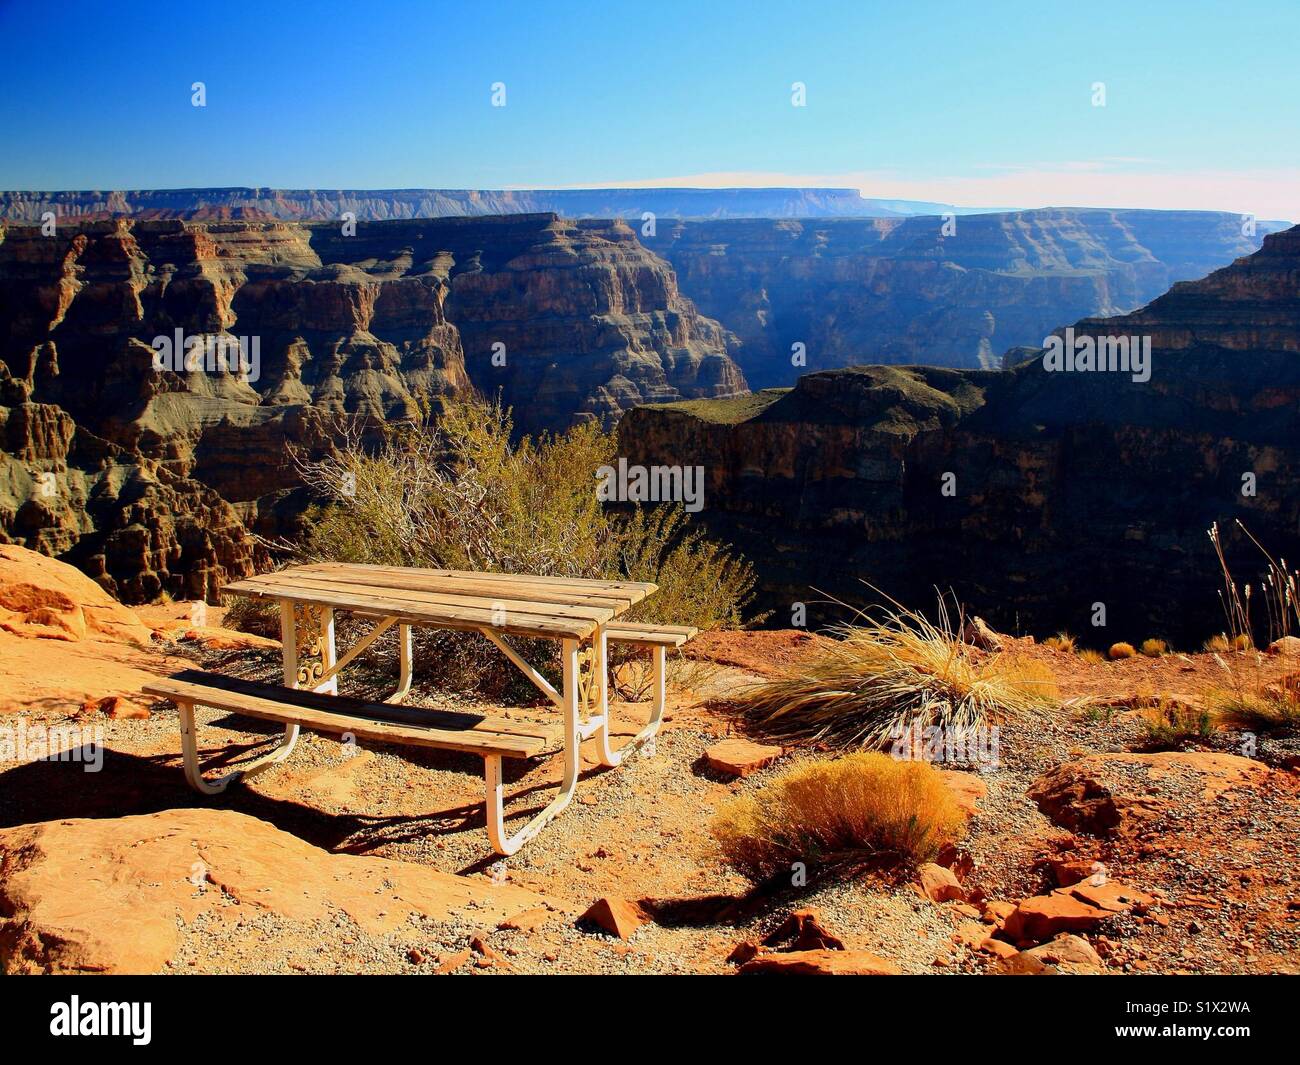 Picnic bench with a view of the Grand Canyon Stock Photo